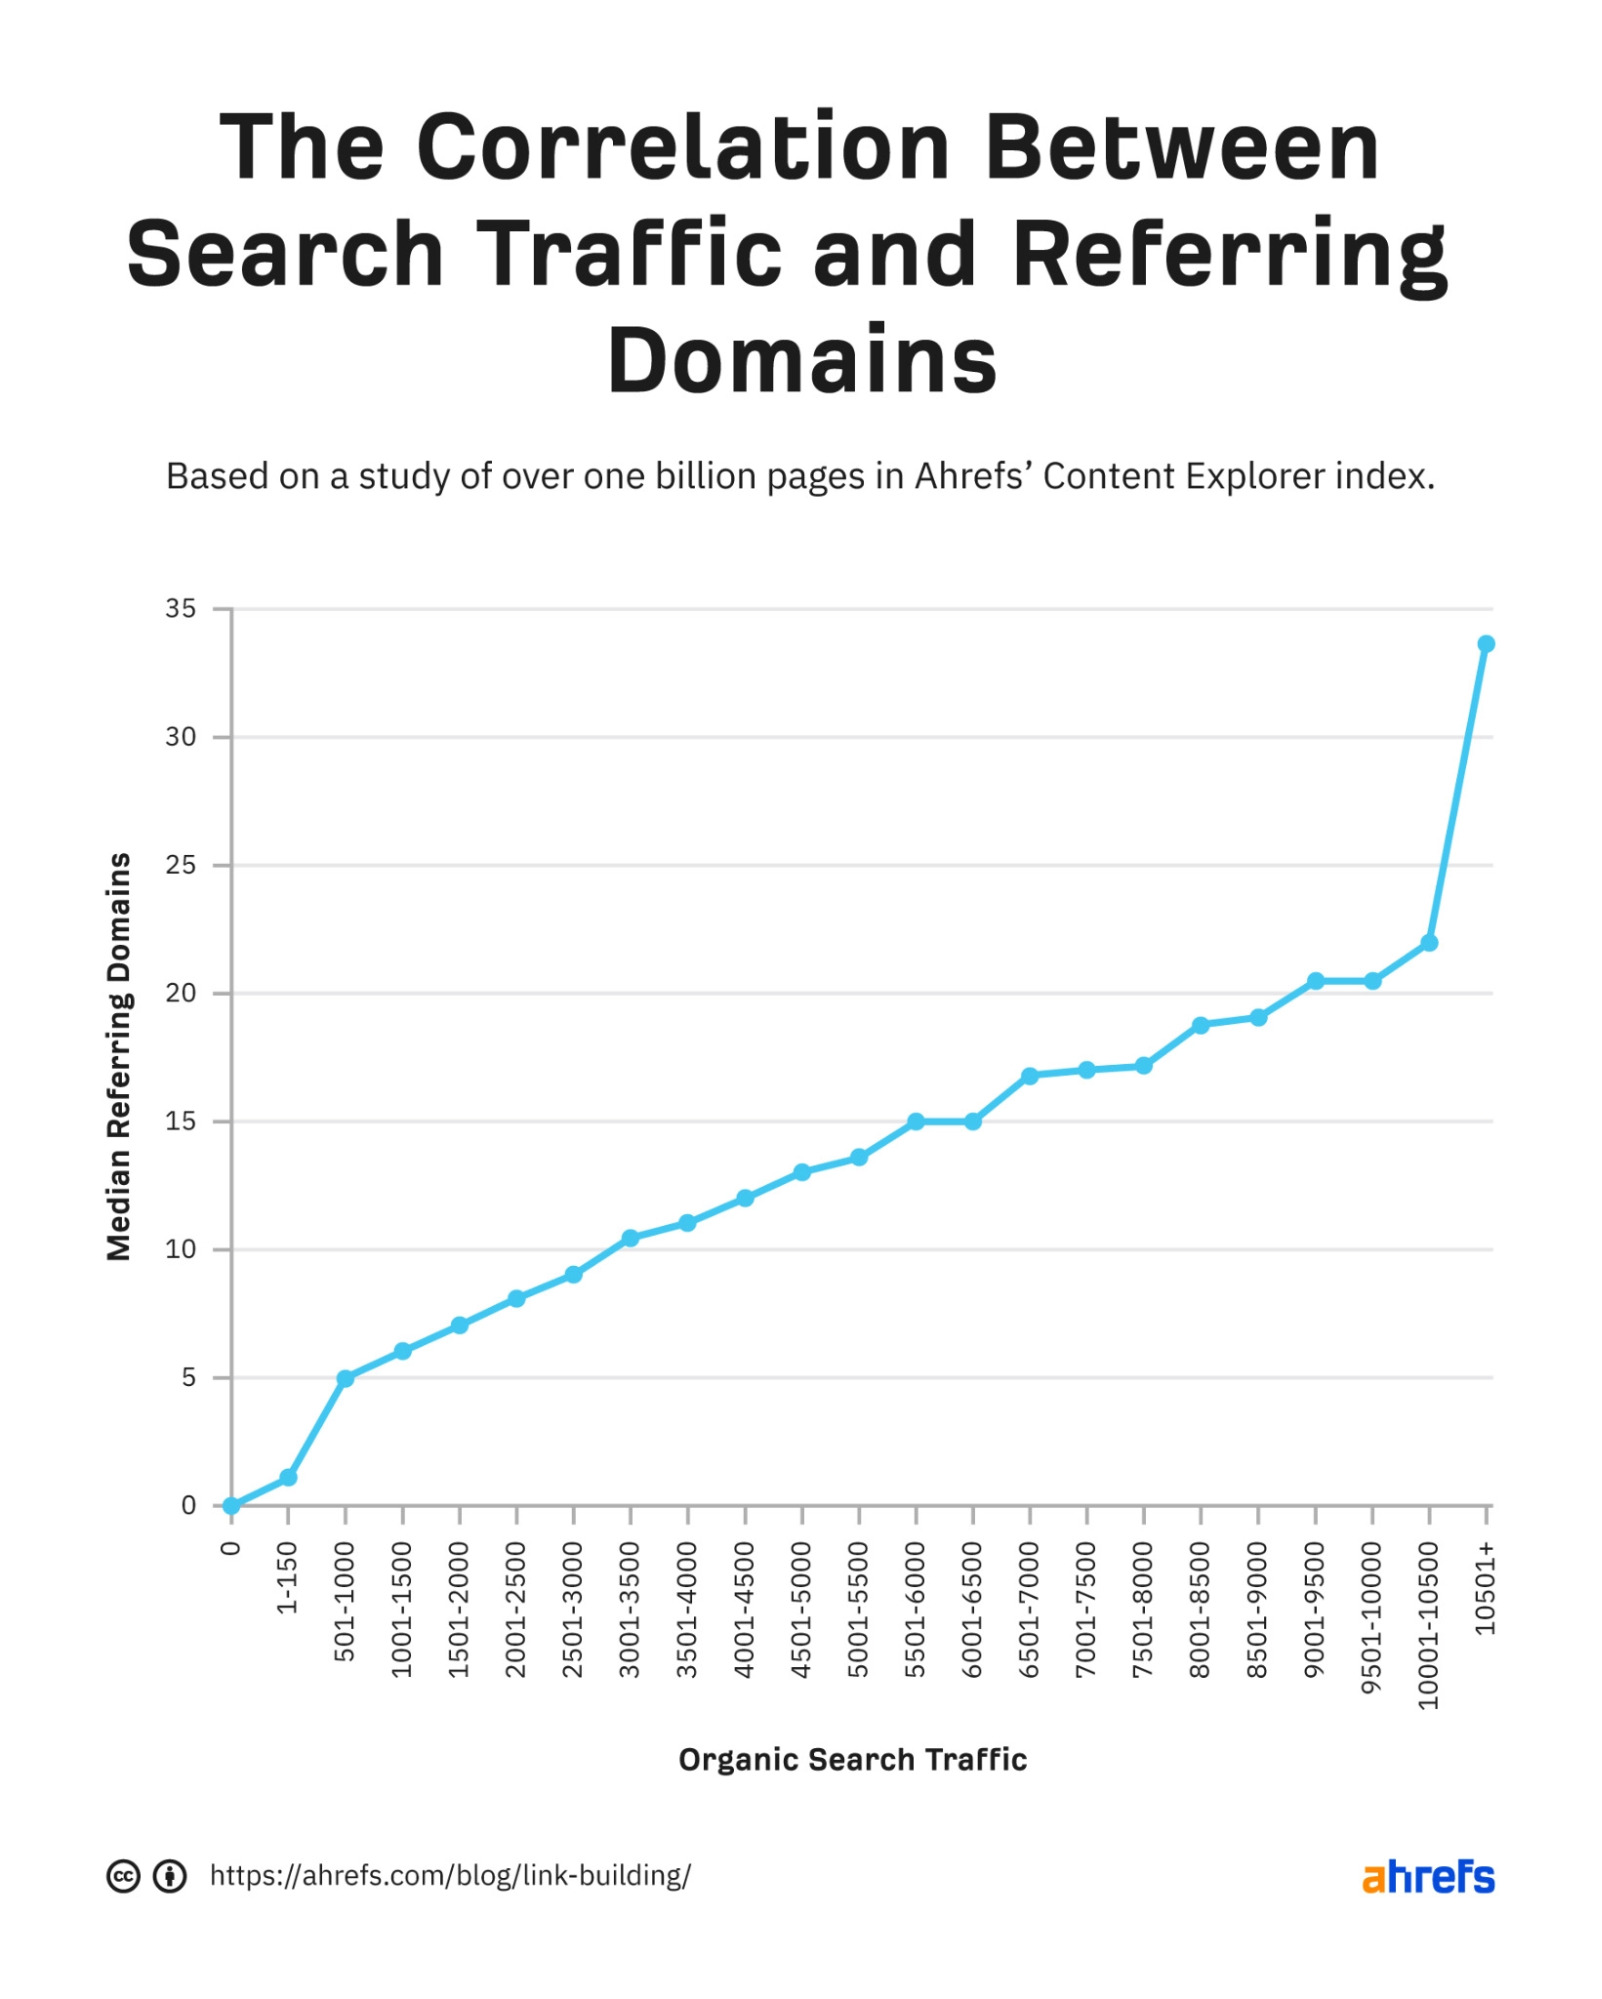 Correlation between search traffic and referring domains